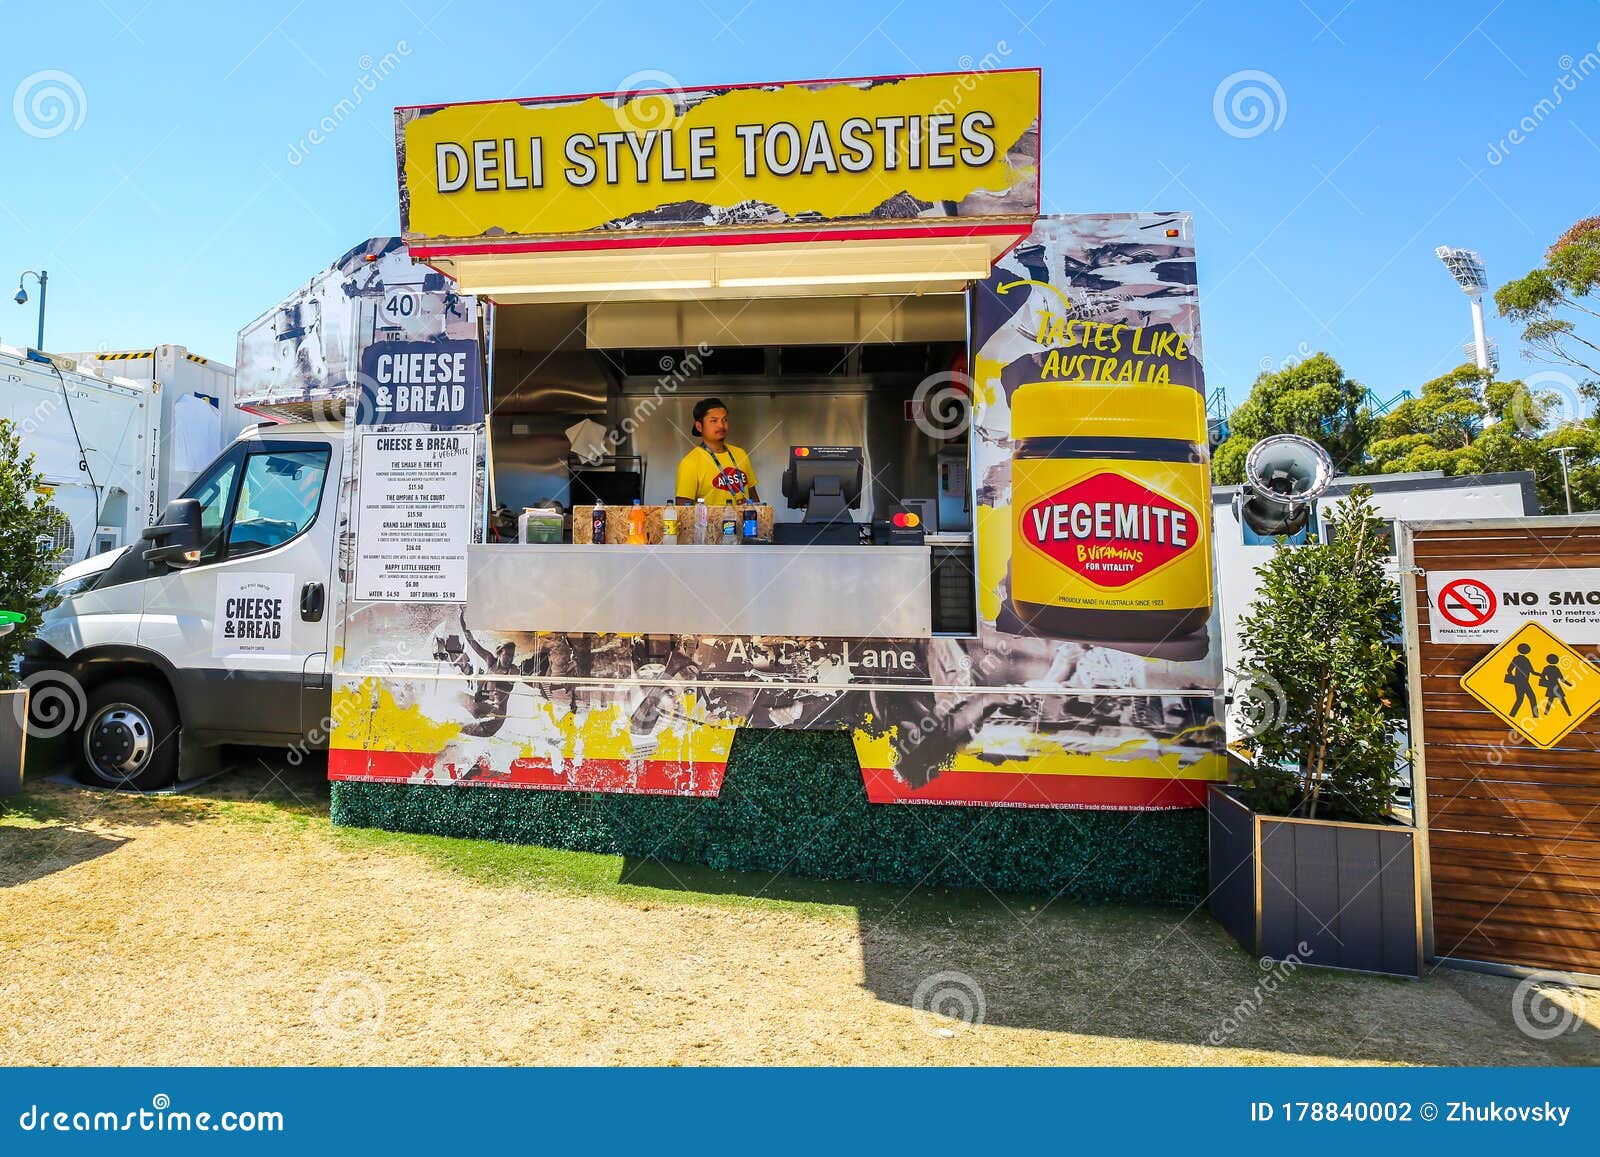 Deli Style Toasties with Vegemite Food Truck during 2019 Australian Open in Melbourne Editorial Photography - Image of tennis, 178840002